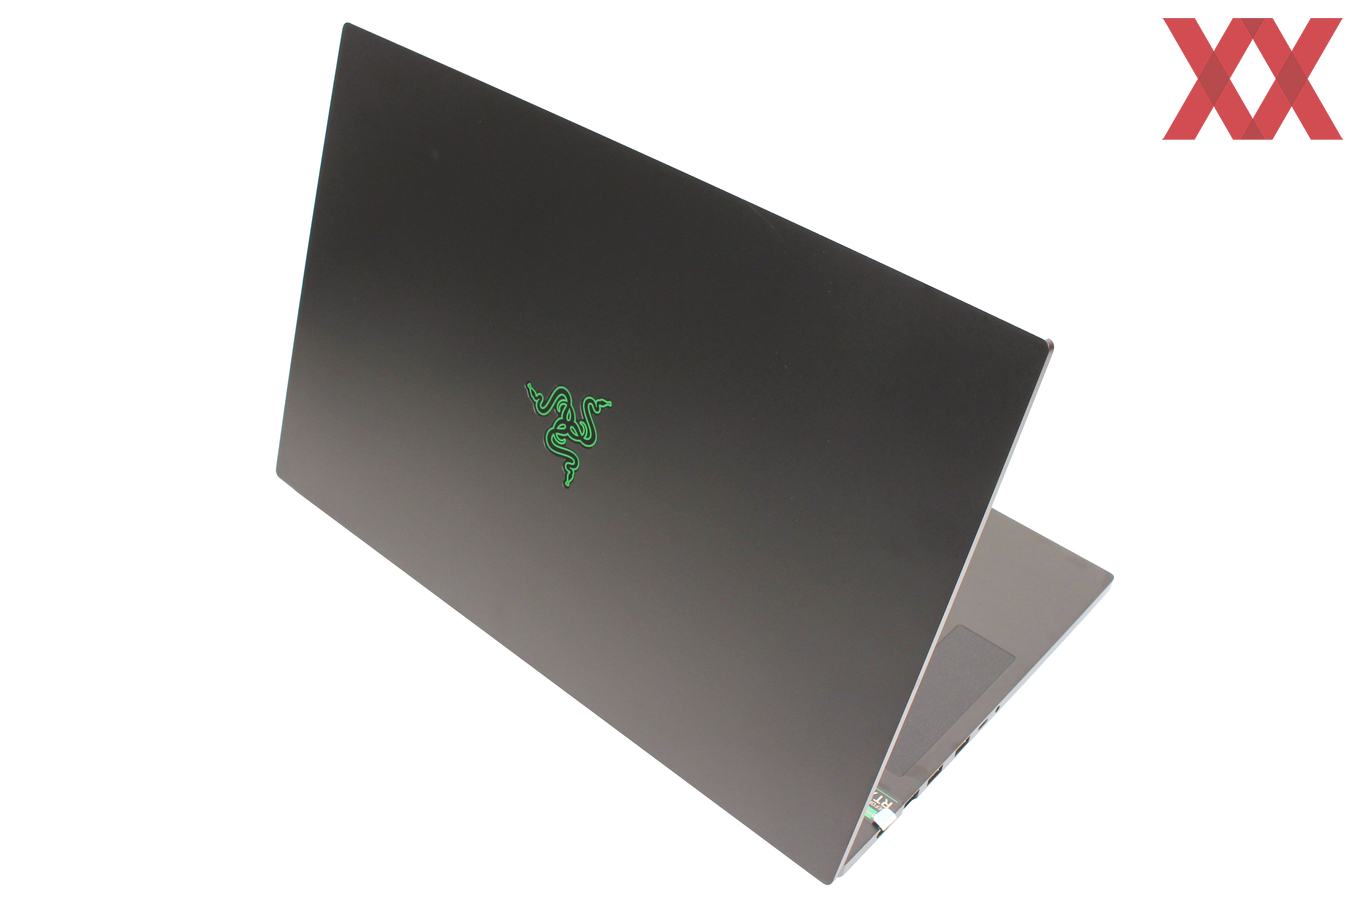 Razer blade pro 17 (2019) packs a 17-inch laptop into 15-inch chassis, gets nvidia rtx graphics